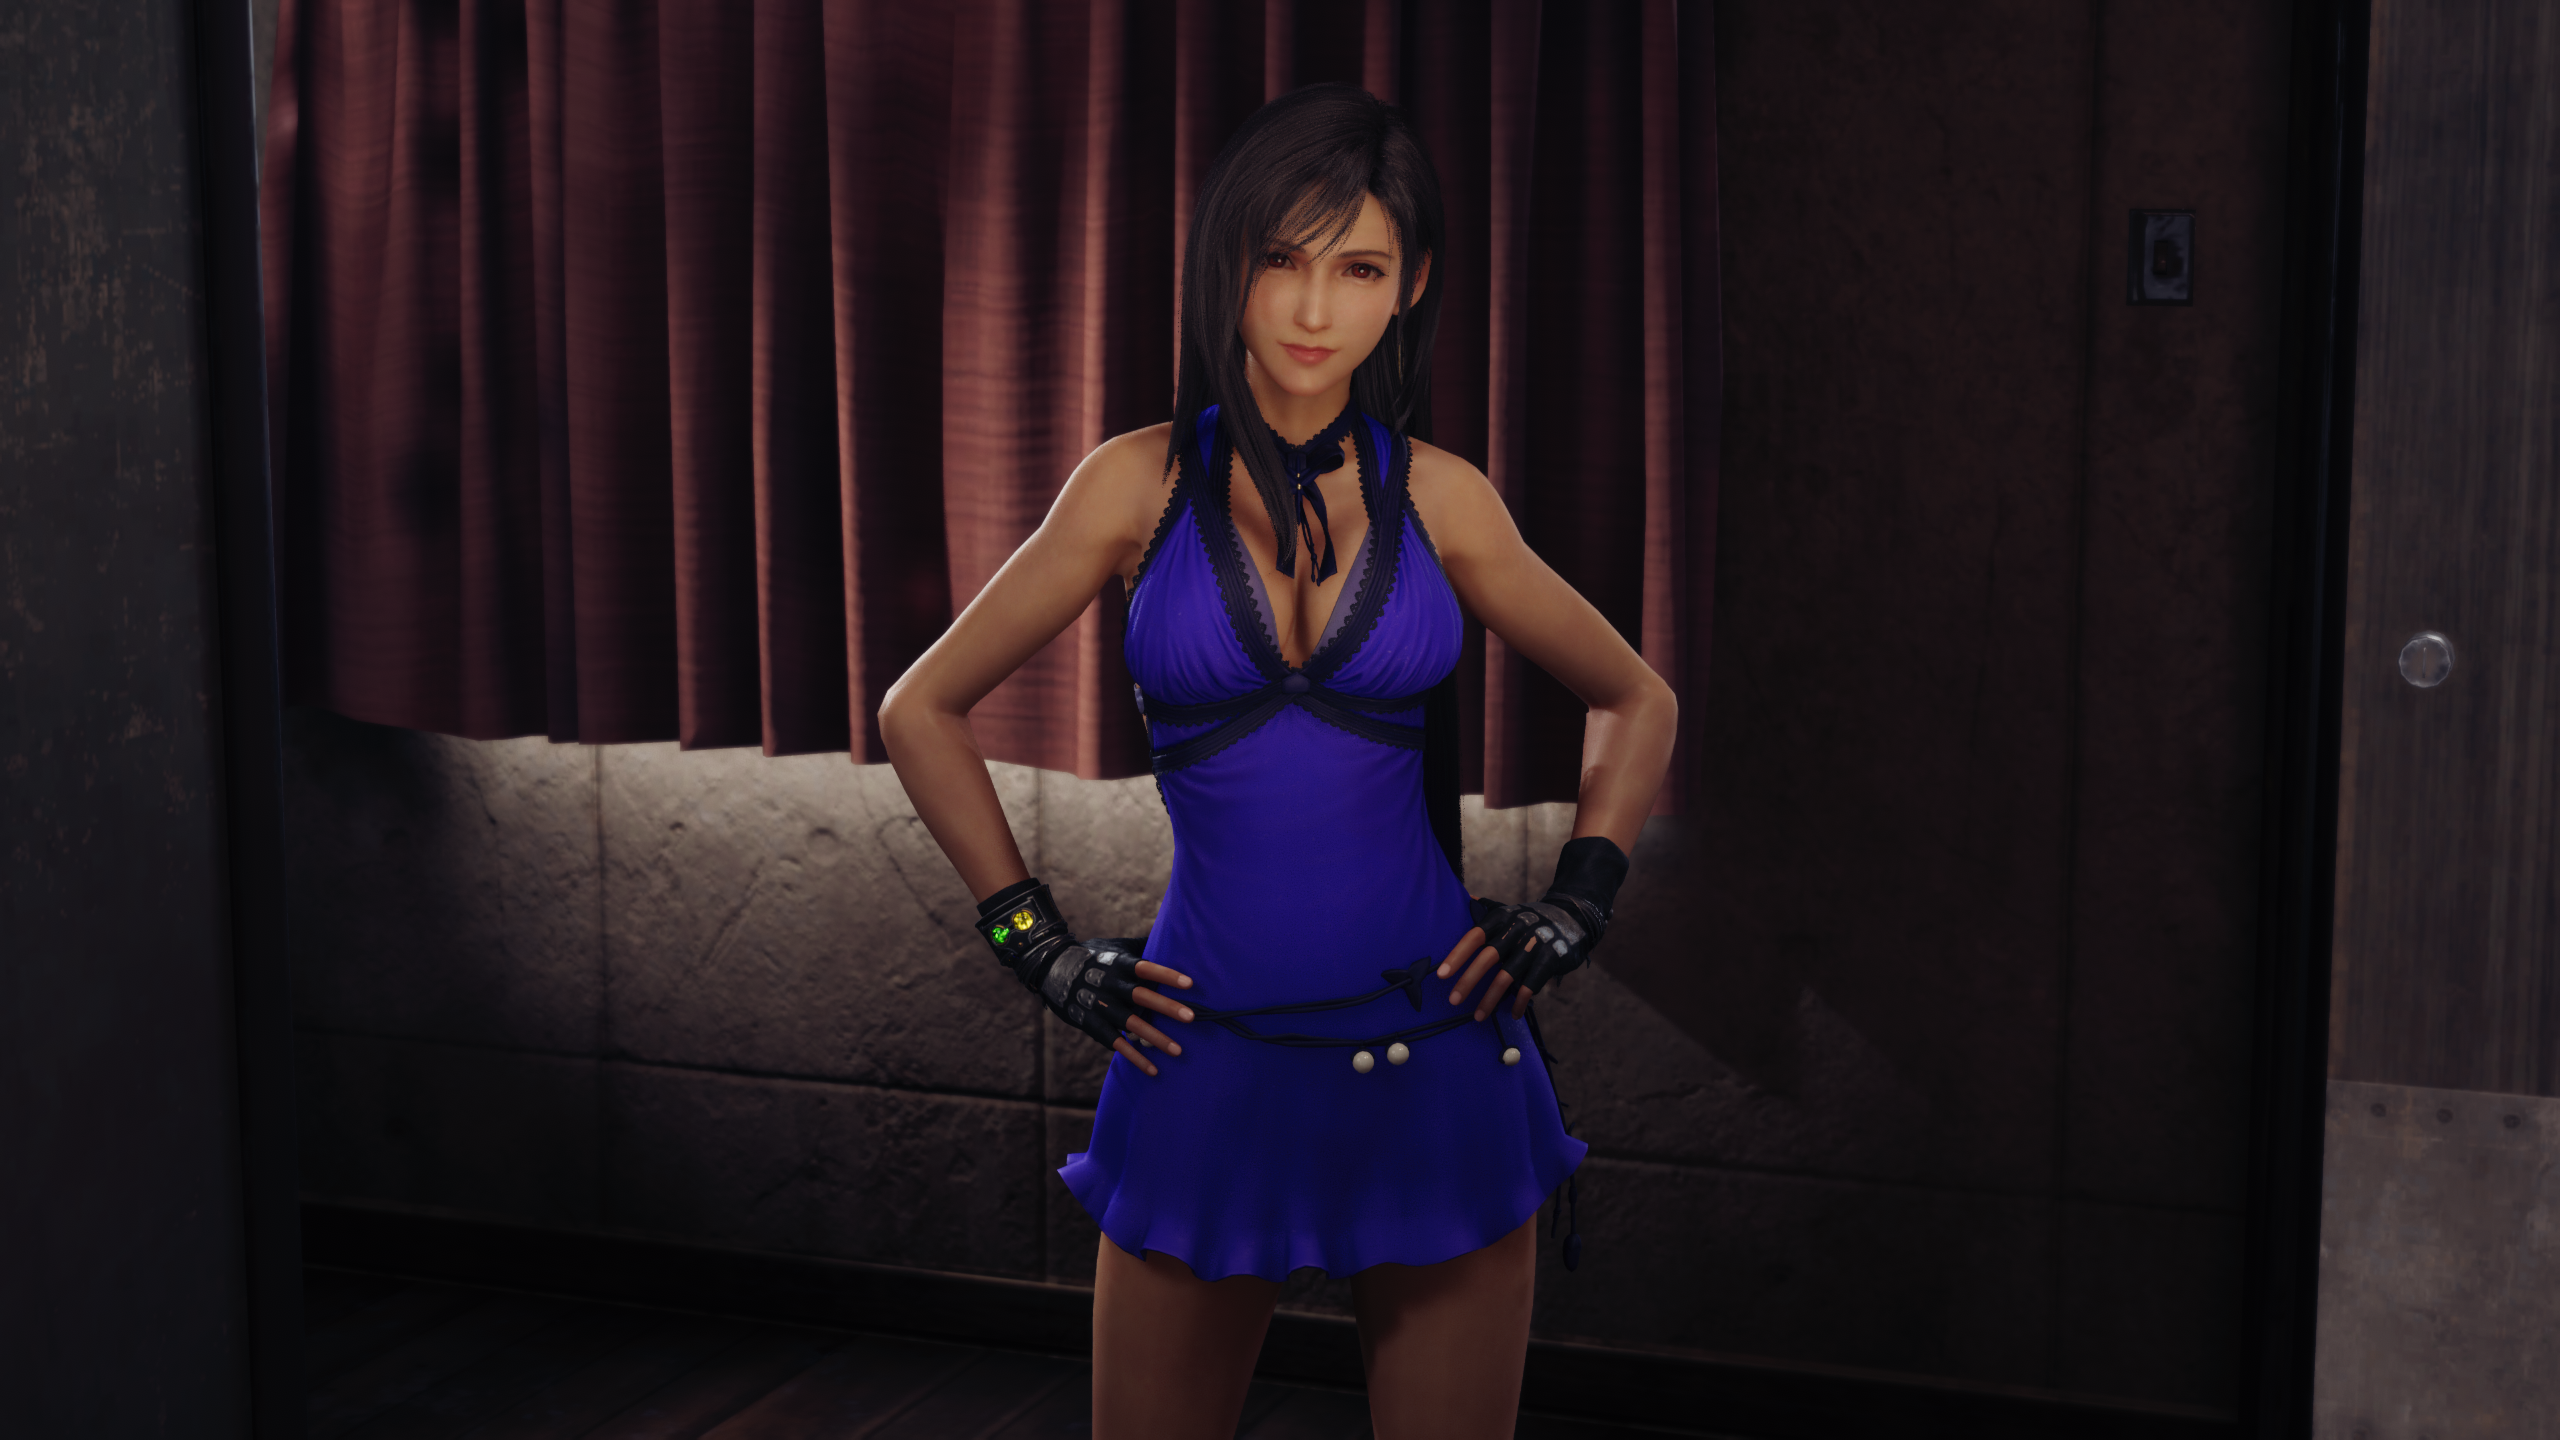 This is how the character model looks like after you install the Final Fantasy 7 Remake Tifa Purple Dress Mod